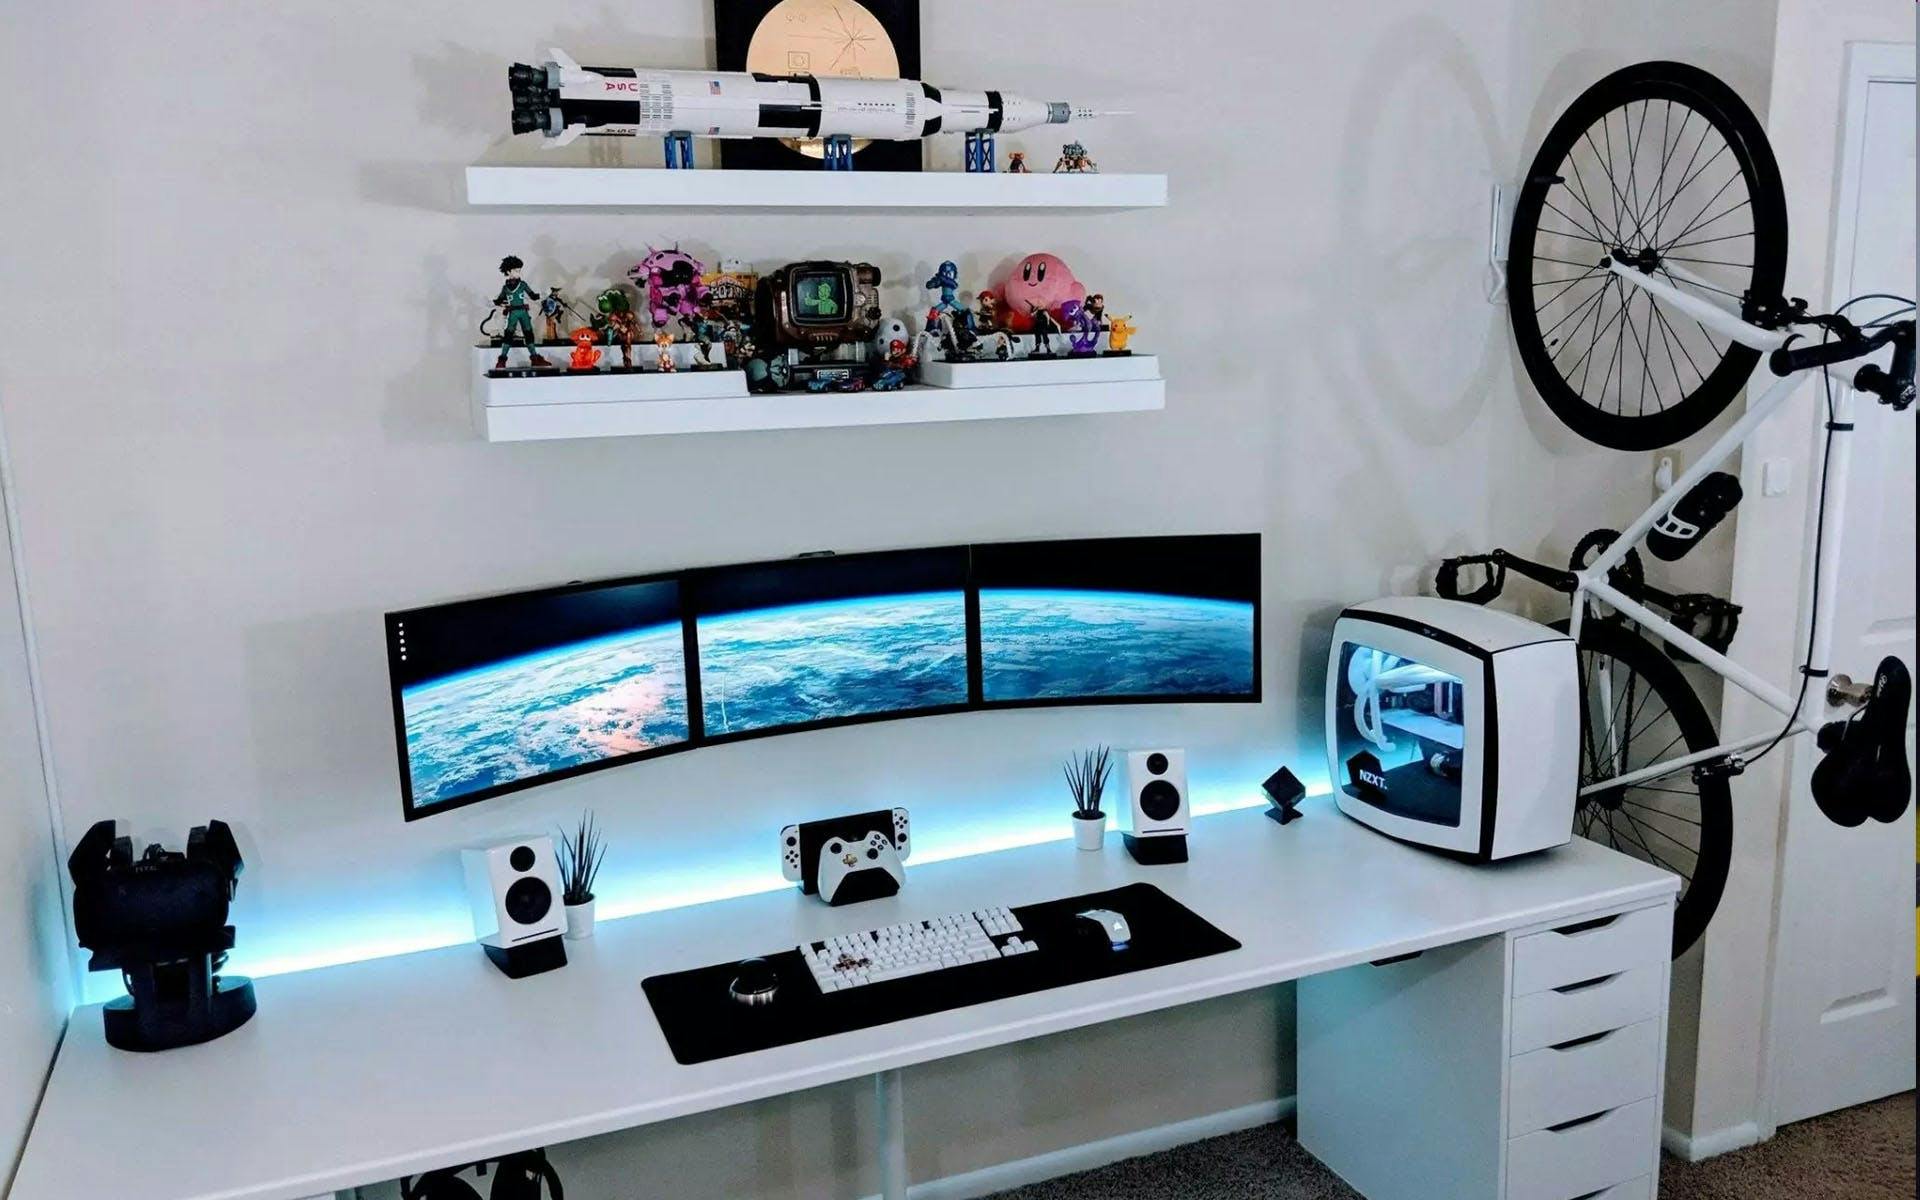 A light theming of the gaming corner (e.g. with "Space") always looks good | Credit: foyr.com